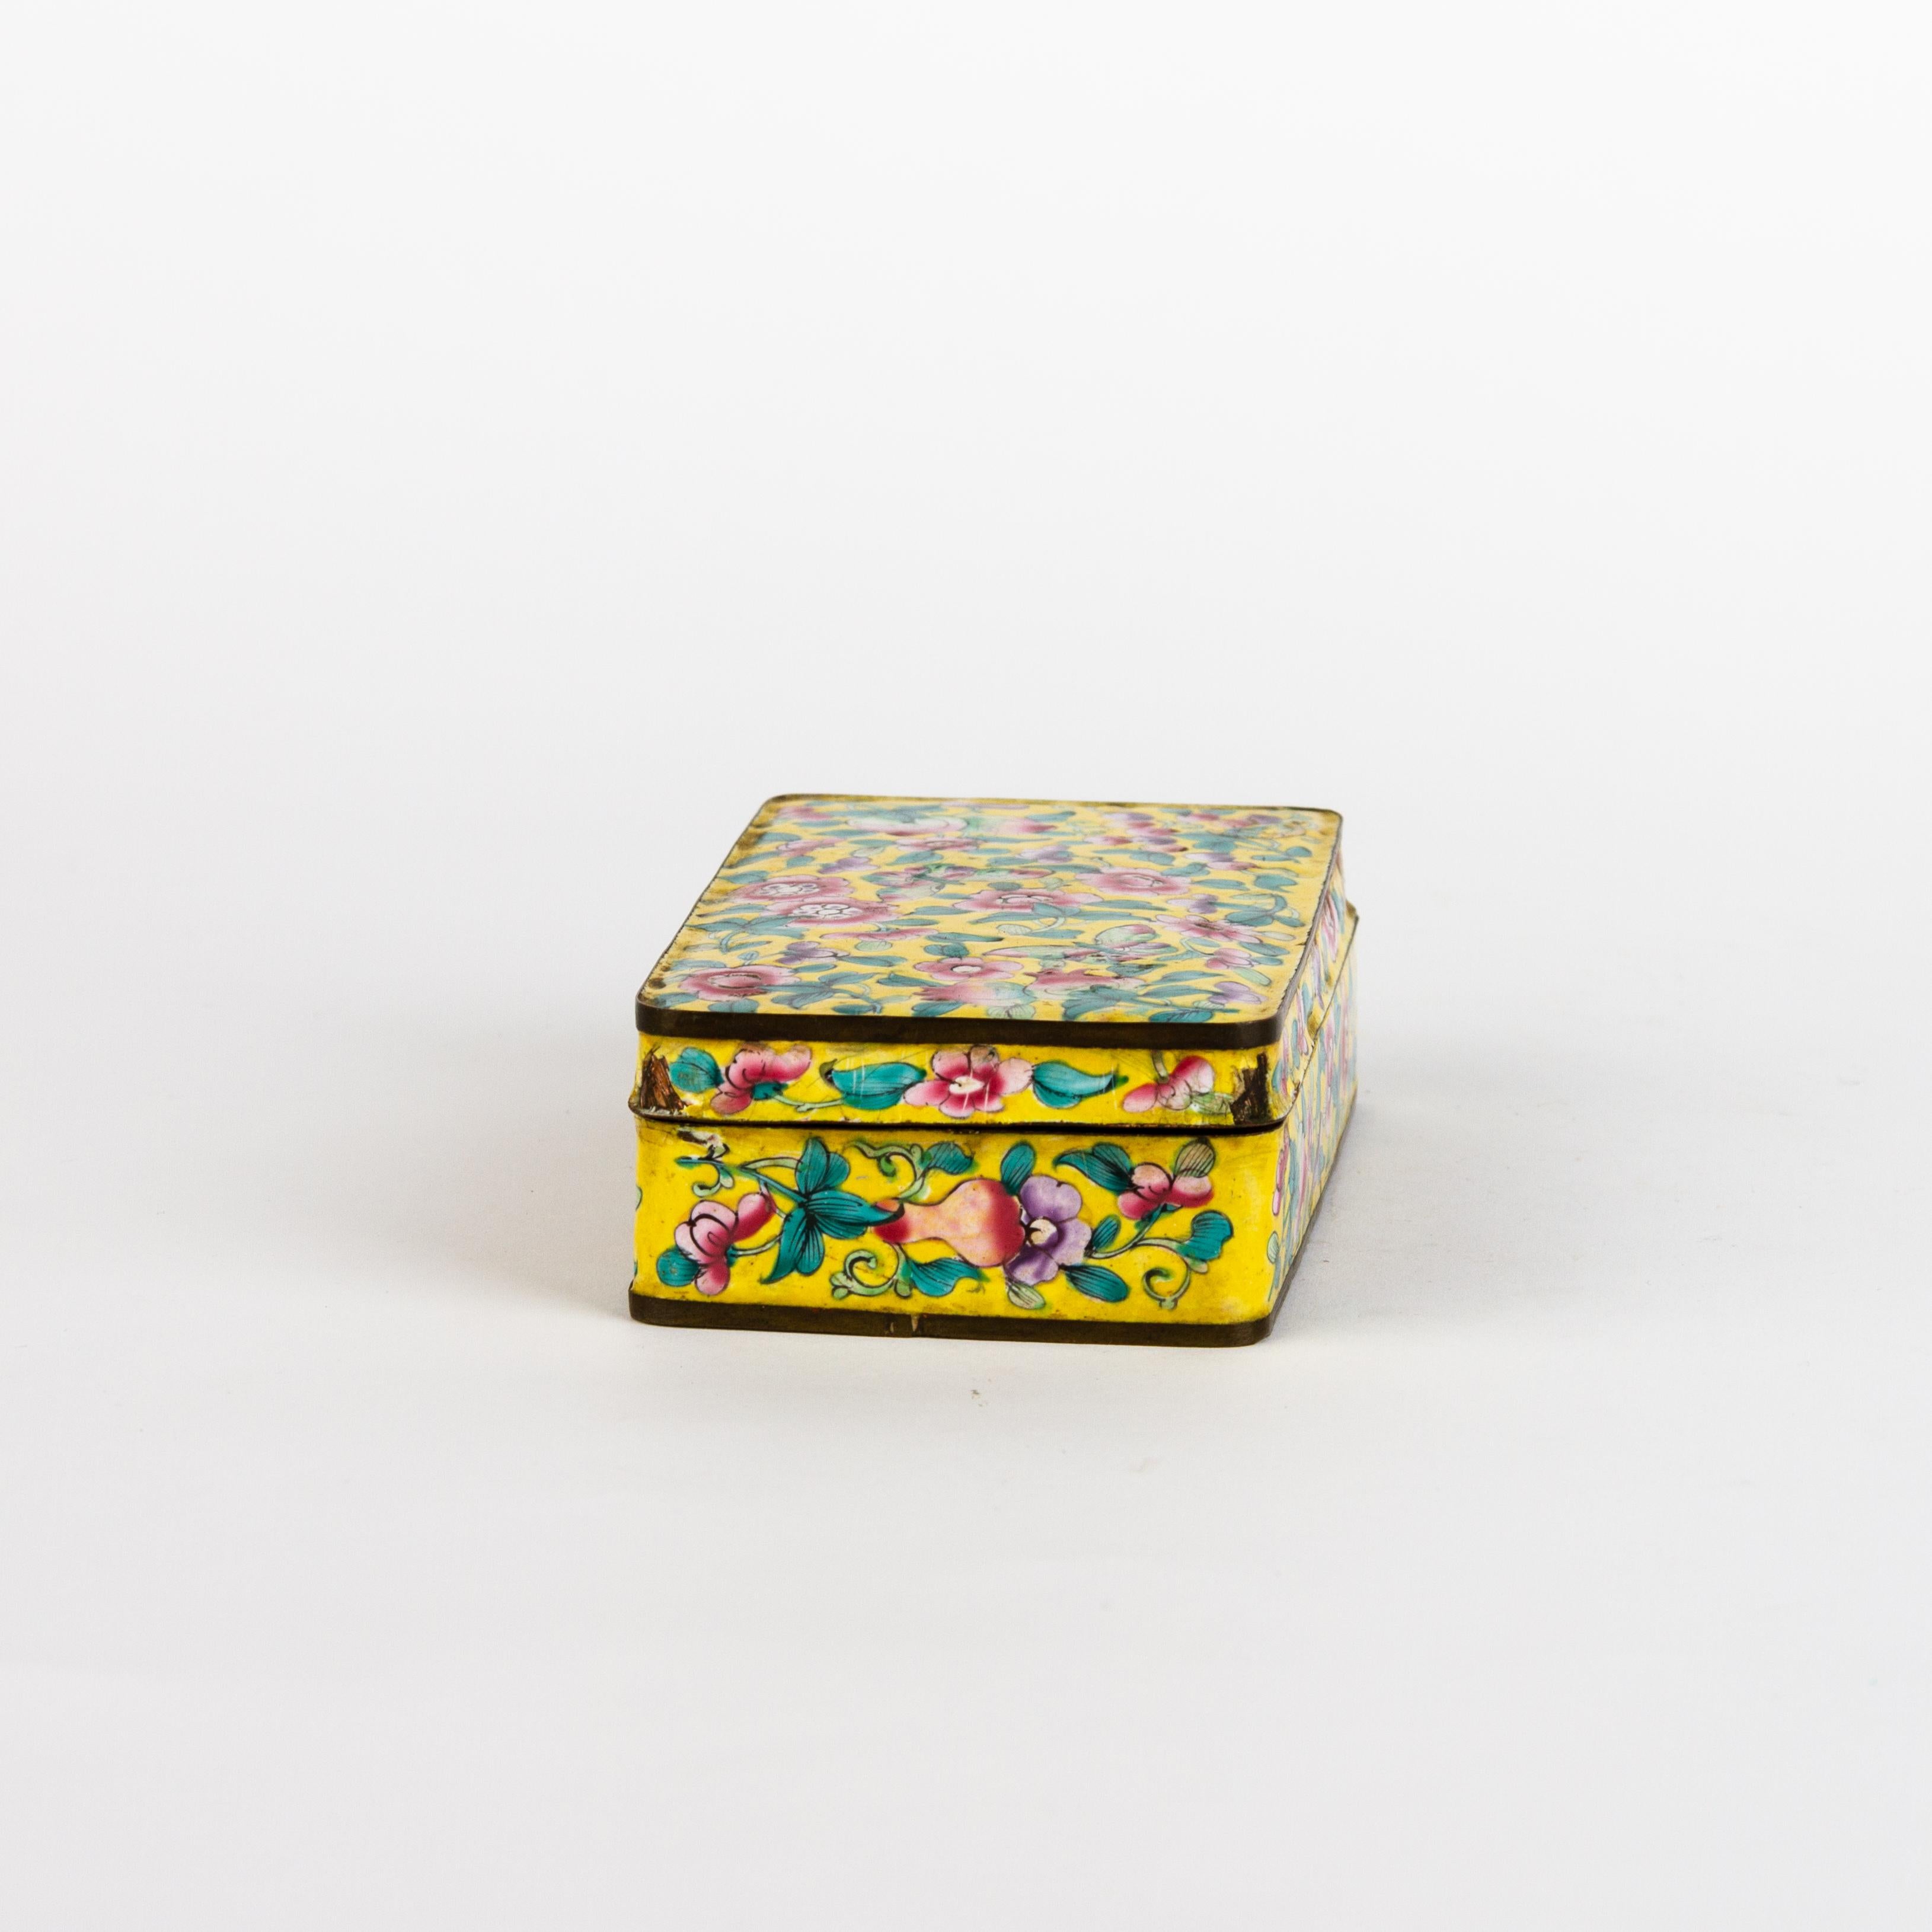 Chinese Yellow Canton Hand-Painted Butterflies Enamel Lidded Box 19th Century
Good condition
Free international shipping.